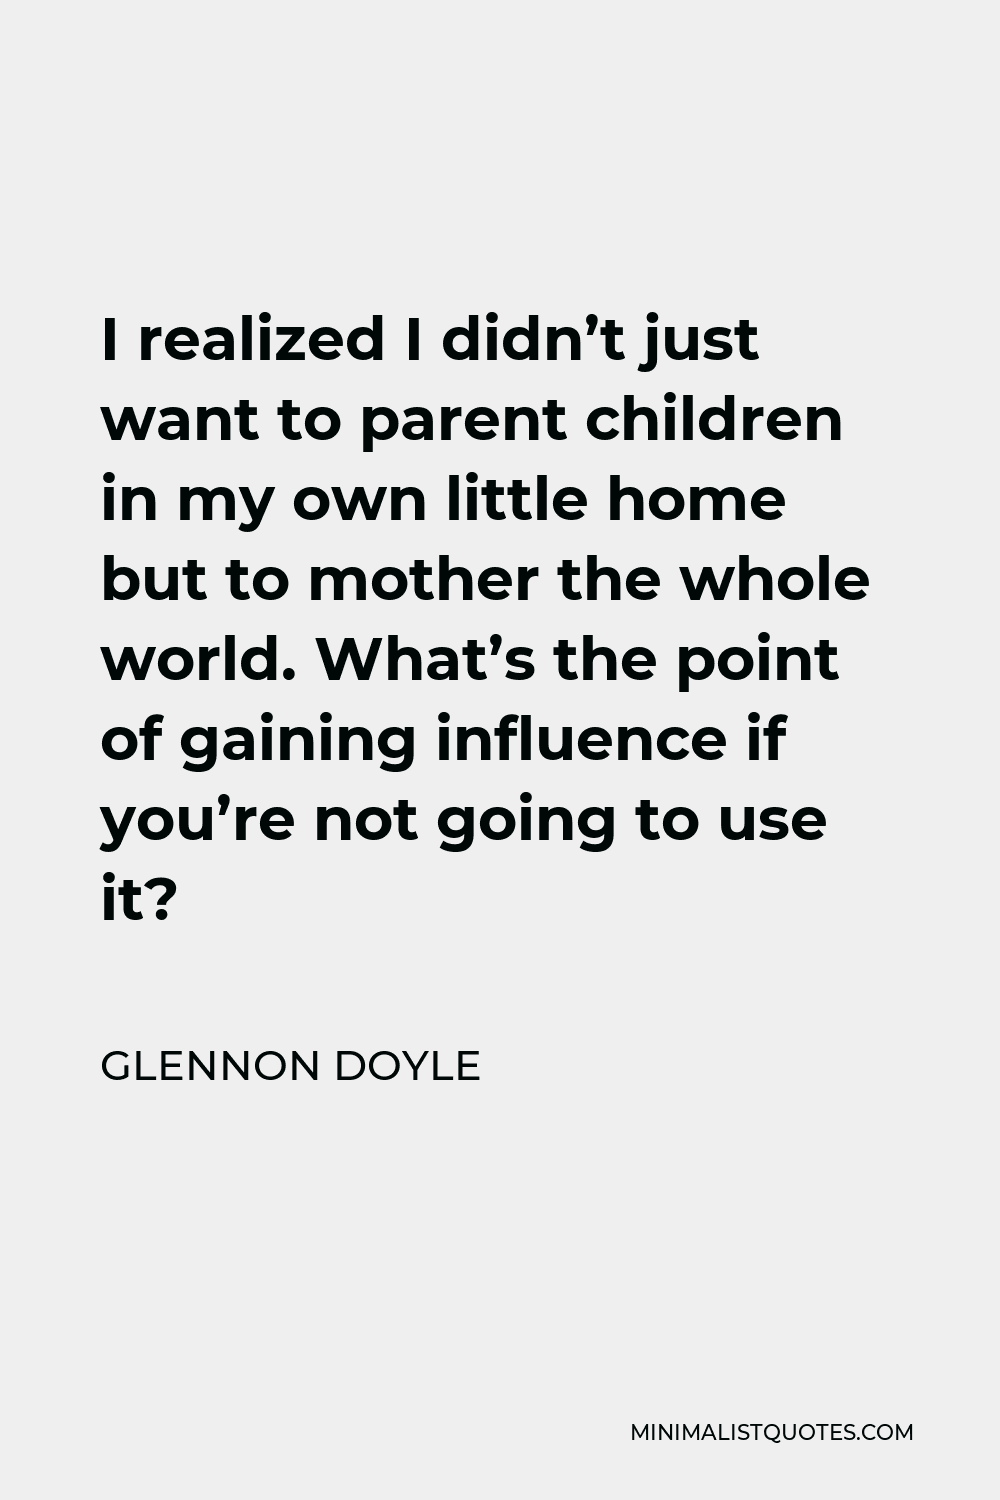 Glennon Doyle Quote - I realized I didn’t just want to parent children in my own little home but to mother the whole world. What’s the point of gaining influence if you’re not going to use it?